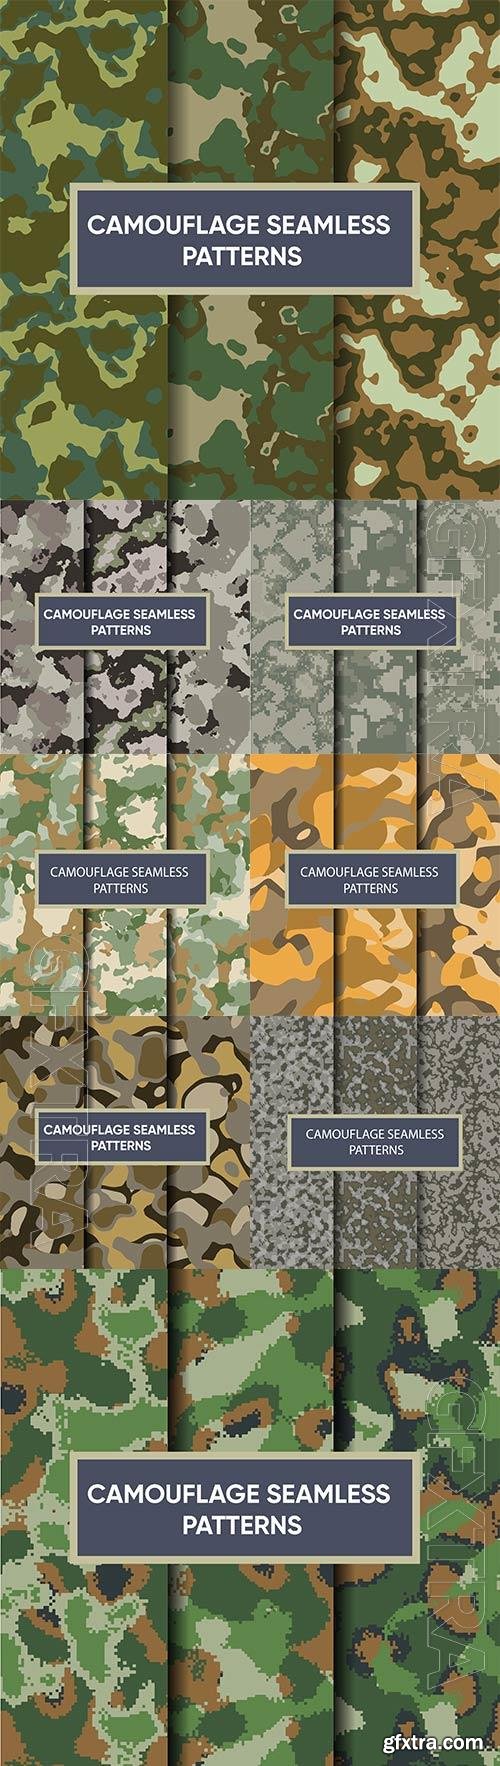 Camouflage military seamless pattern premium vector